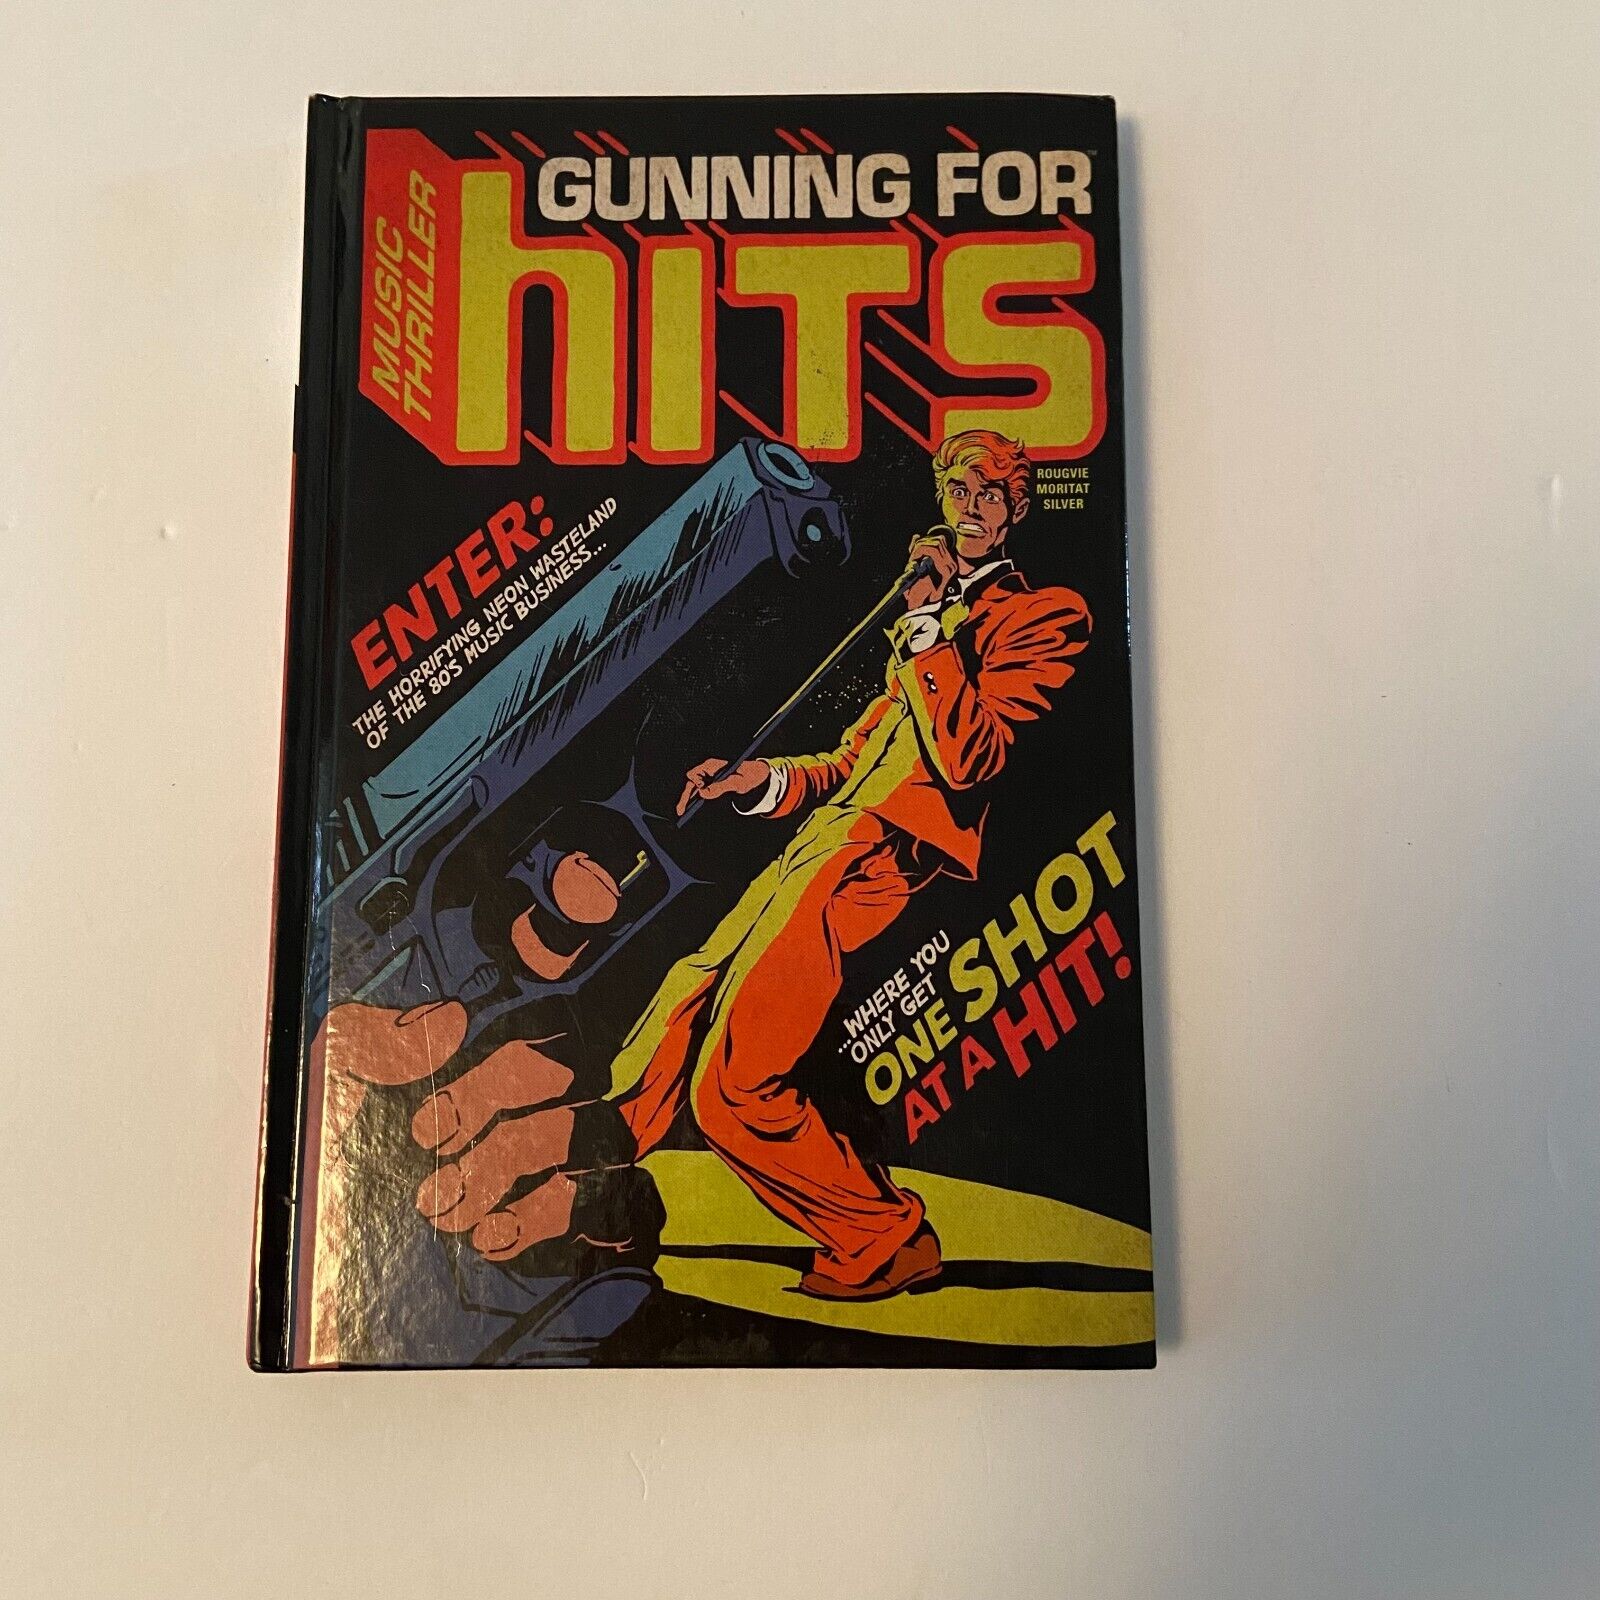 Gunning For Hits Vol. 1 Music Thriller Hardcover 2019 David Bowie Image Comics